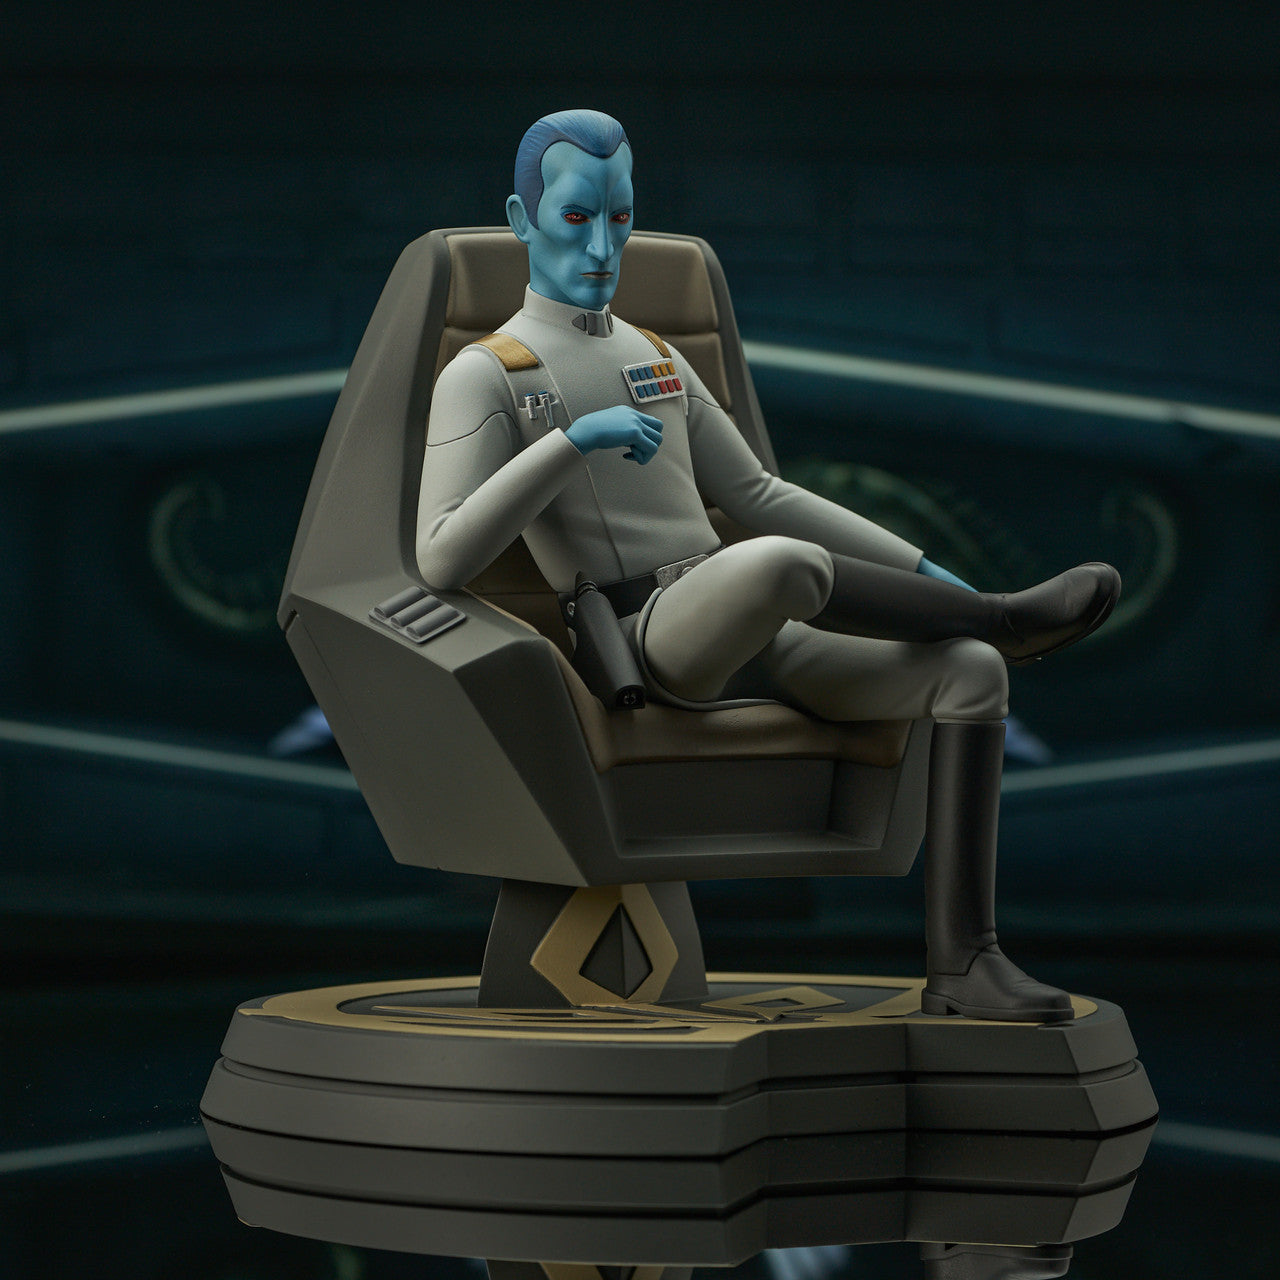 Star Wars Rebels Thrawn on Throne Premier Collection 1:7 Scale Statue by Gentle Giant Studios -Gentle Giant Studios - India - www.superherotoystore.com